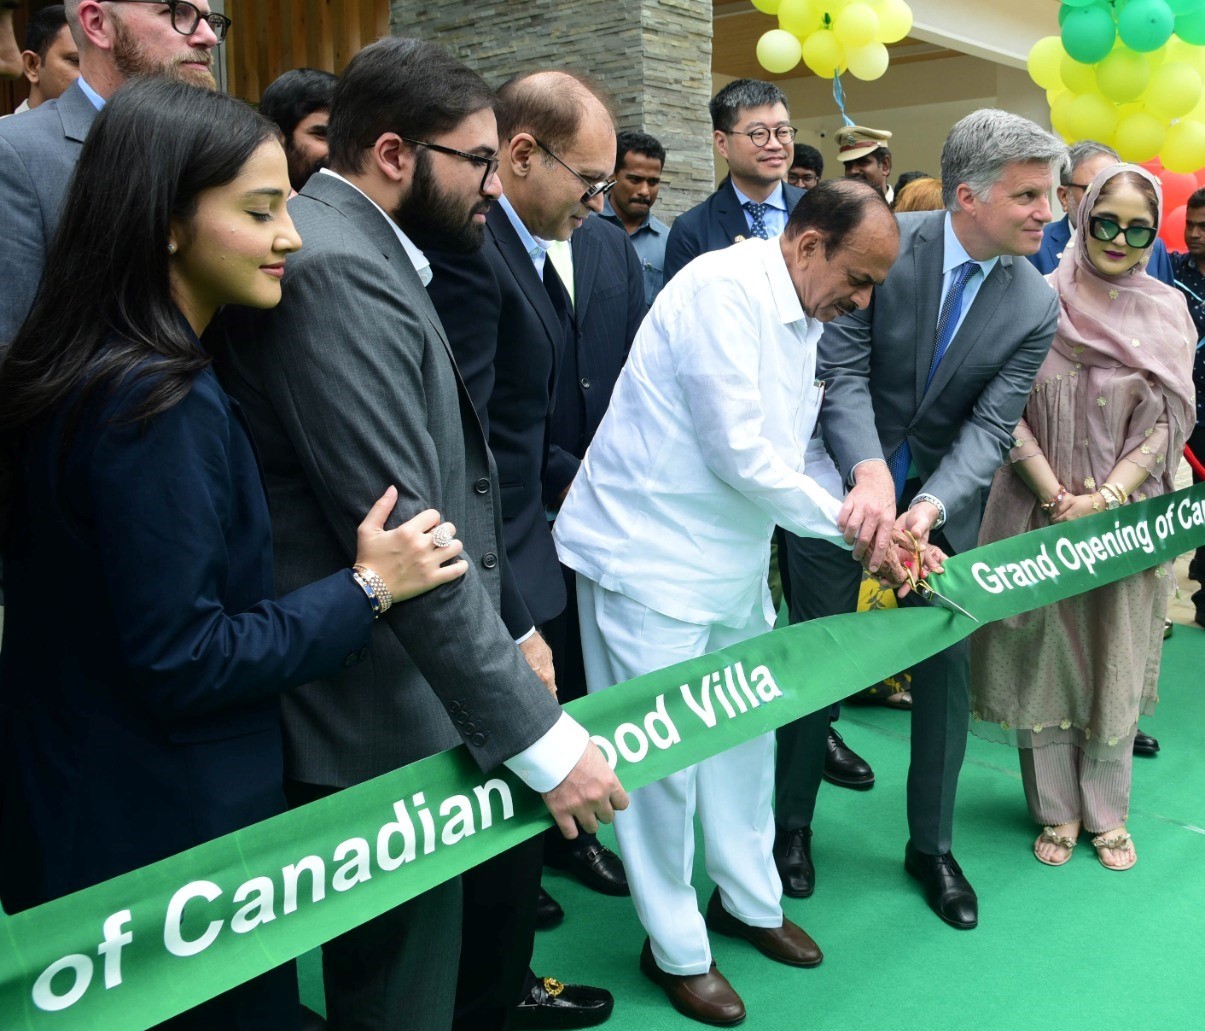  MAK Projects inaugurates the Canadian Wood Villa project in Hyderabad  